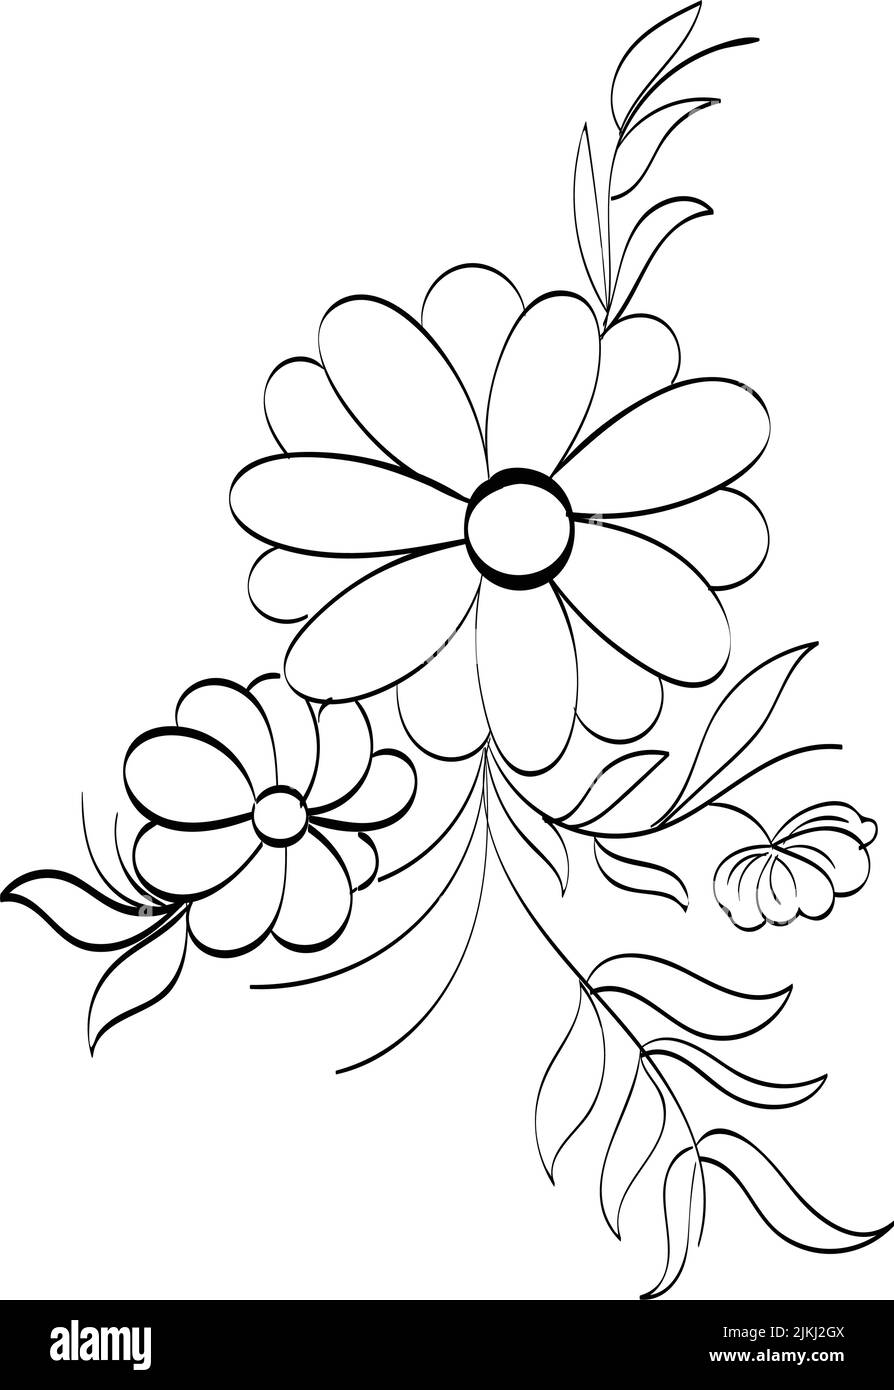 Printable flower Embroidery pattern design Stock Vector Image ...